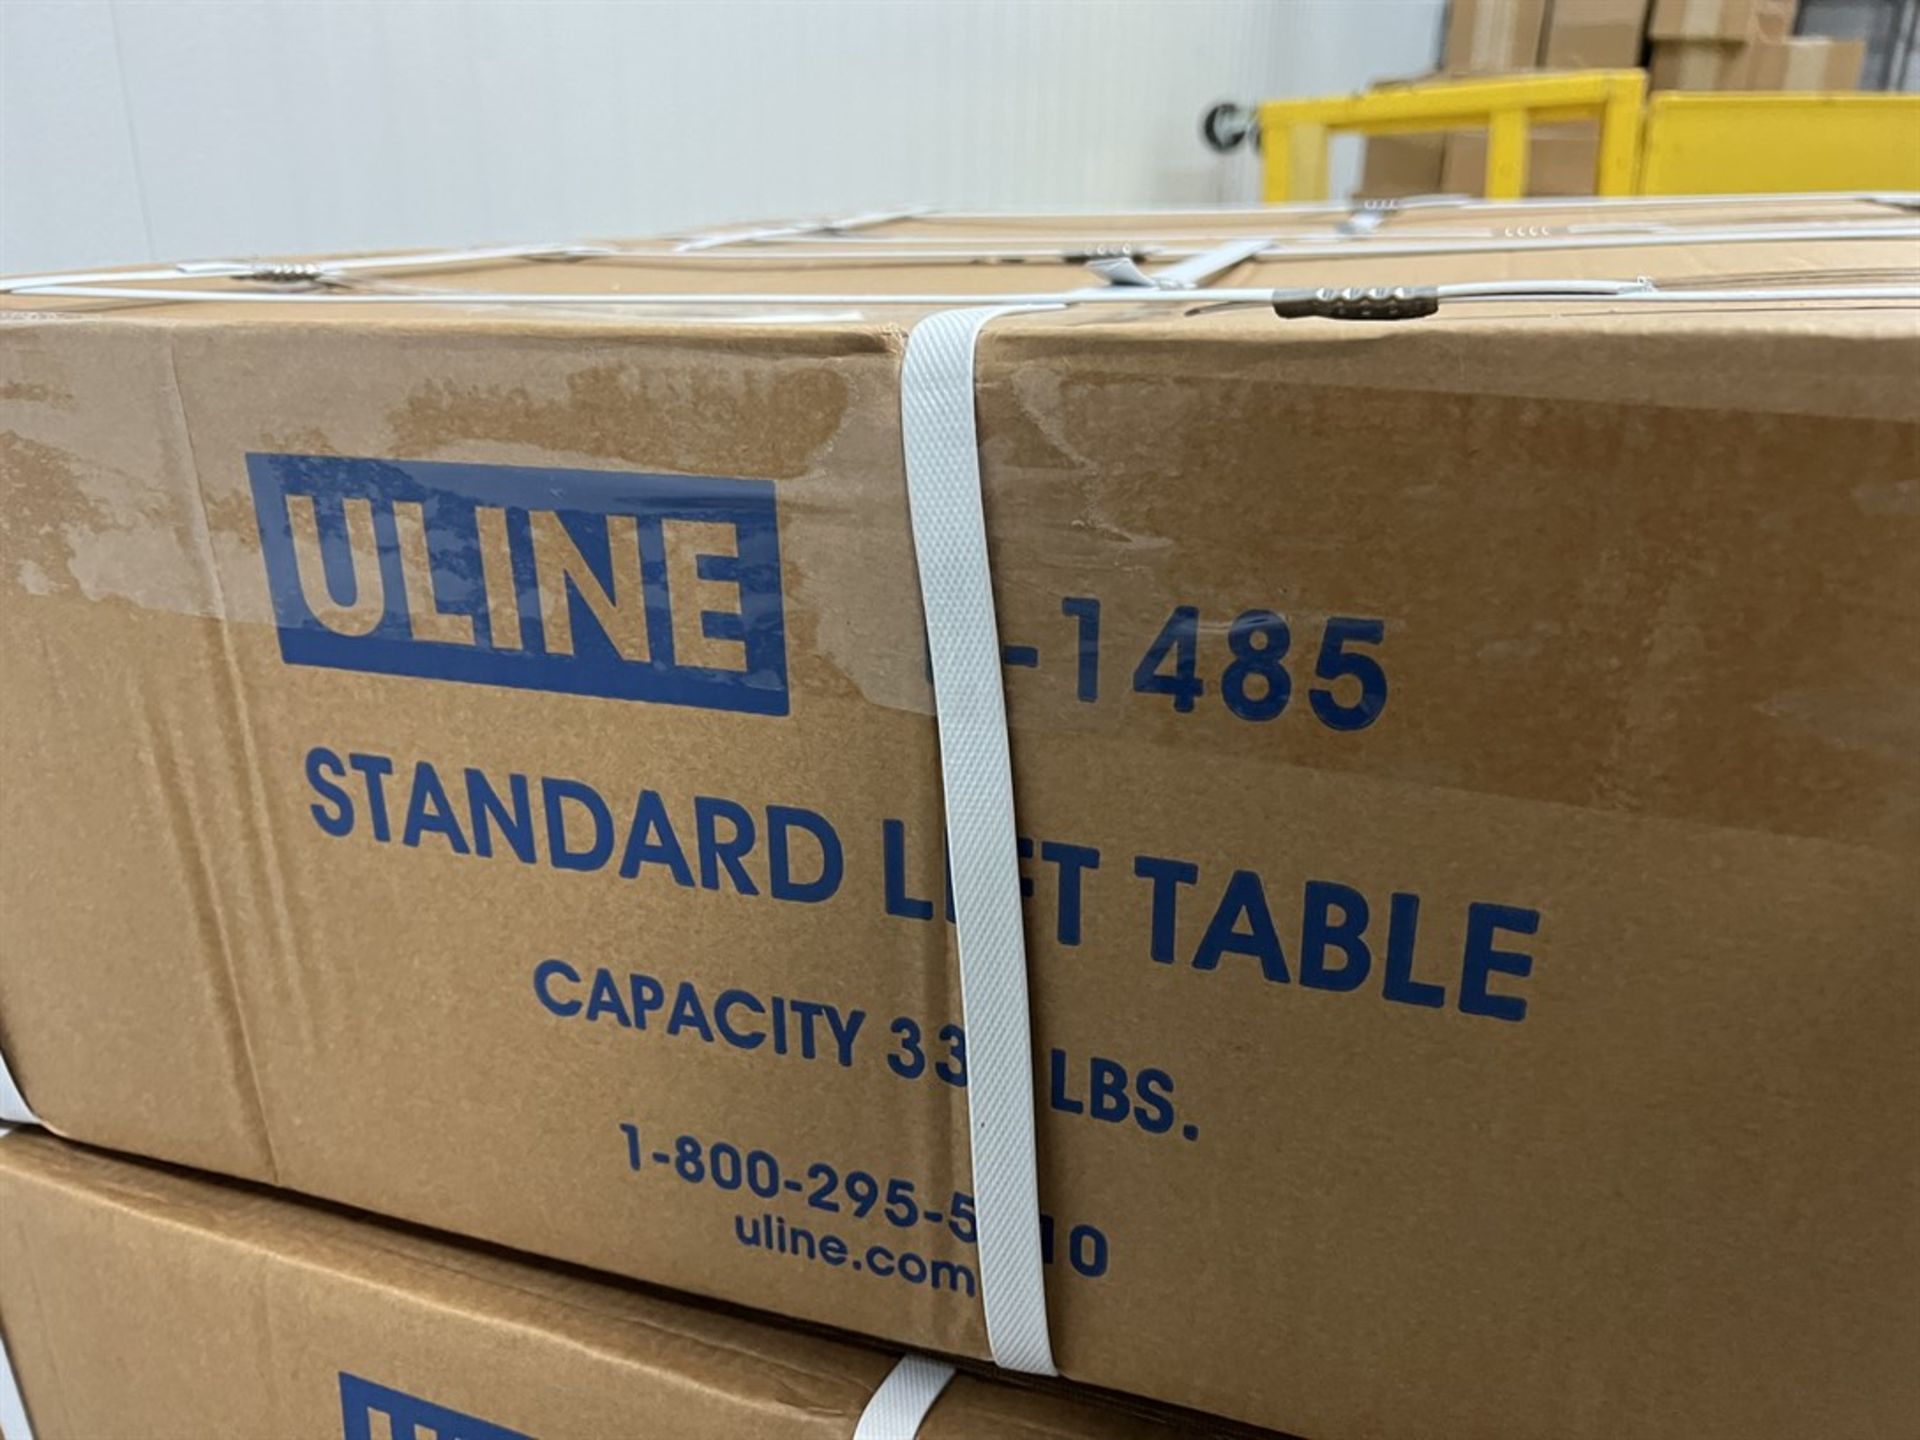 NEW IN BOX ULINE H-1485 Lift Table Cart, 27" x 18", 330 Lb. Capacity - Image 2 of 3